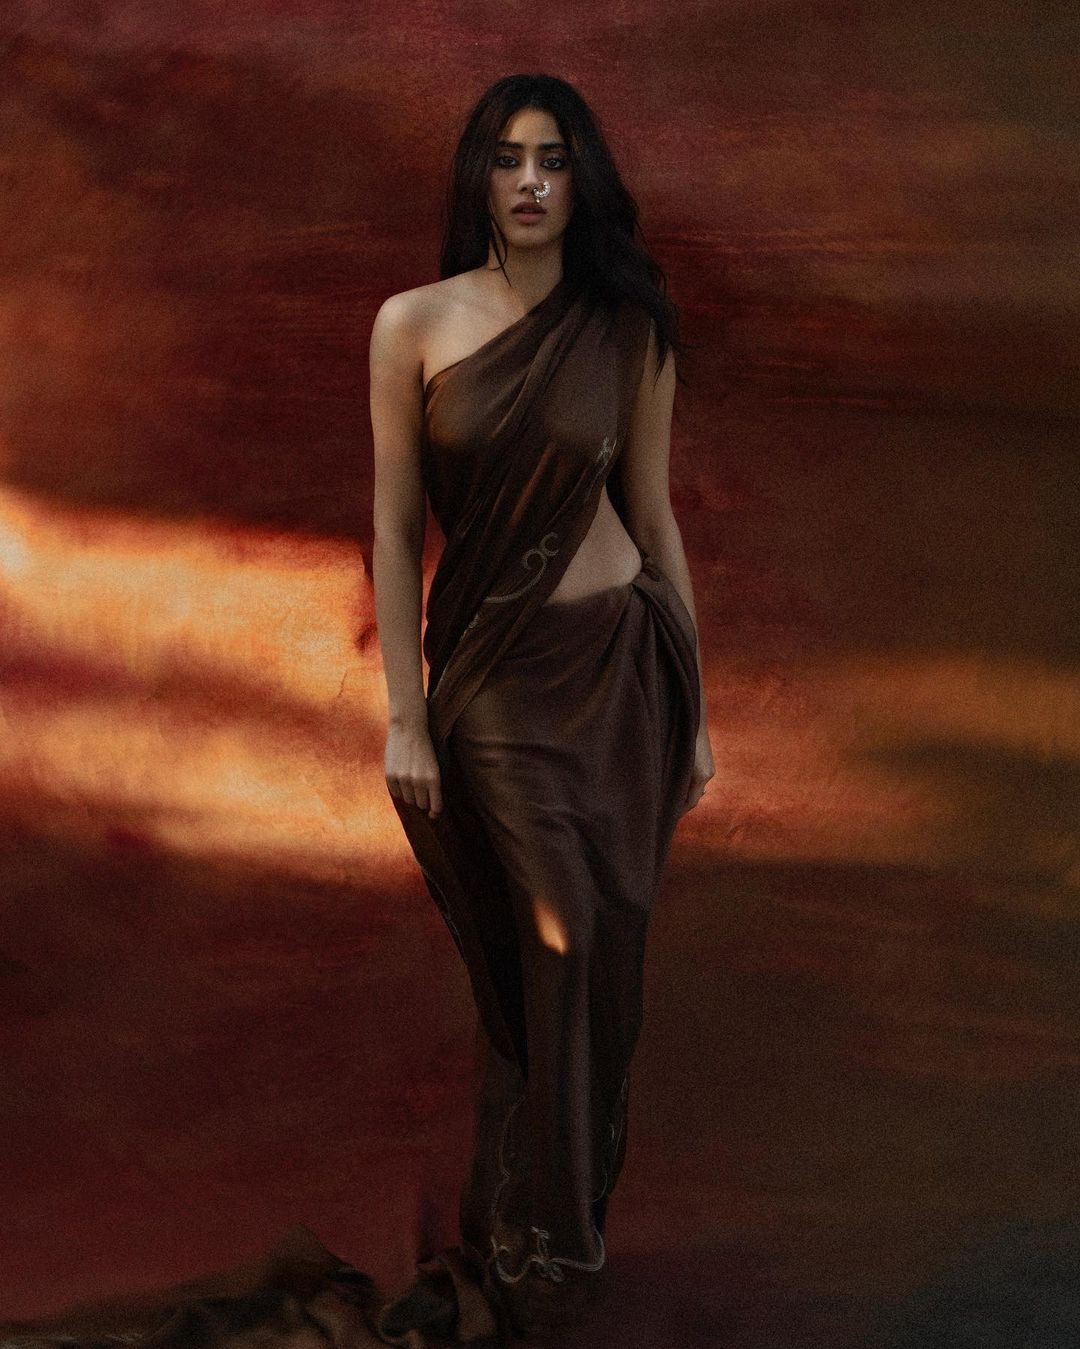 Janhvi Kapoor Makes Jaws Drop Wearing Brown Saree And Nose Pin, Check Out The Diva's Sexy Pictures Draped In The Six Yards - News18